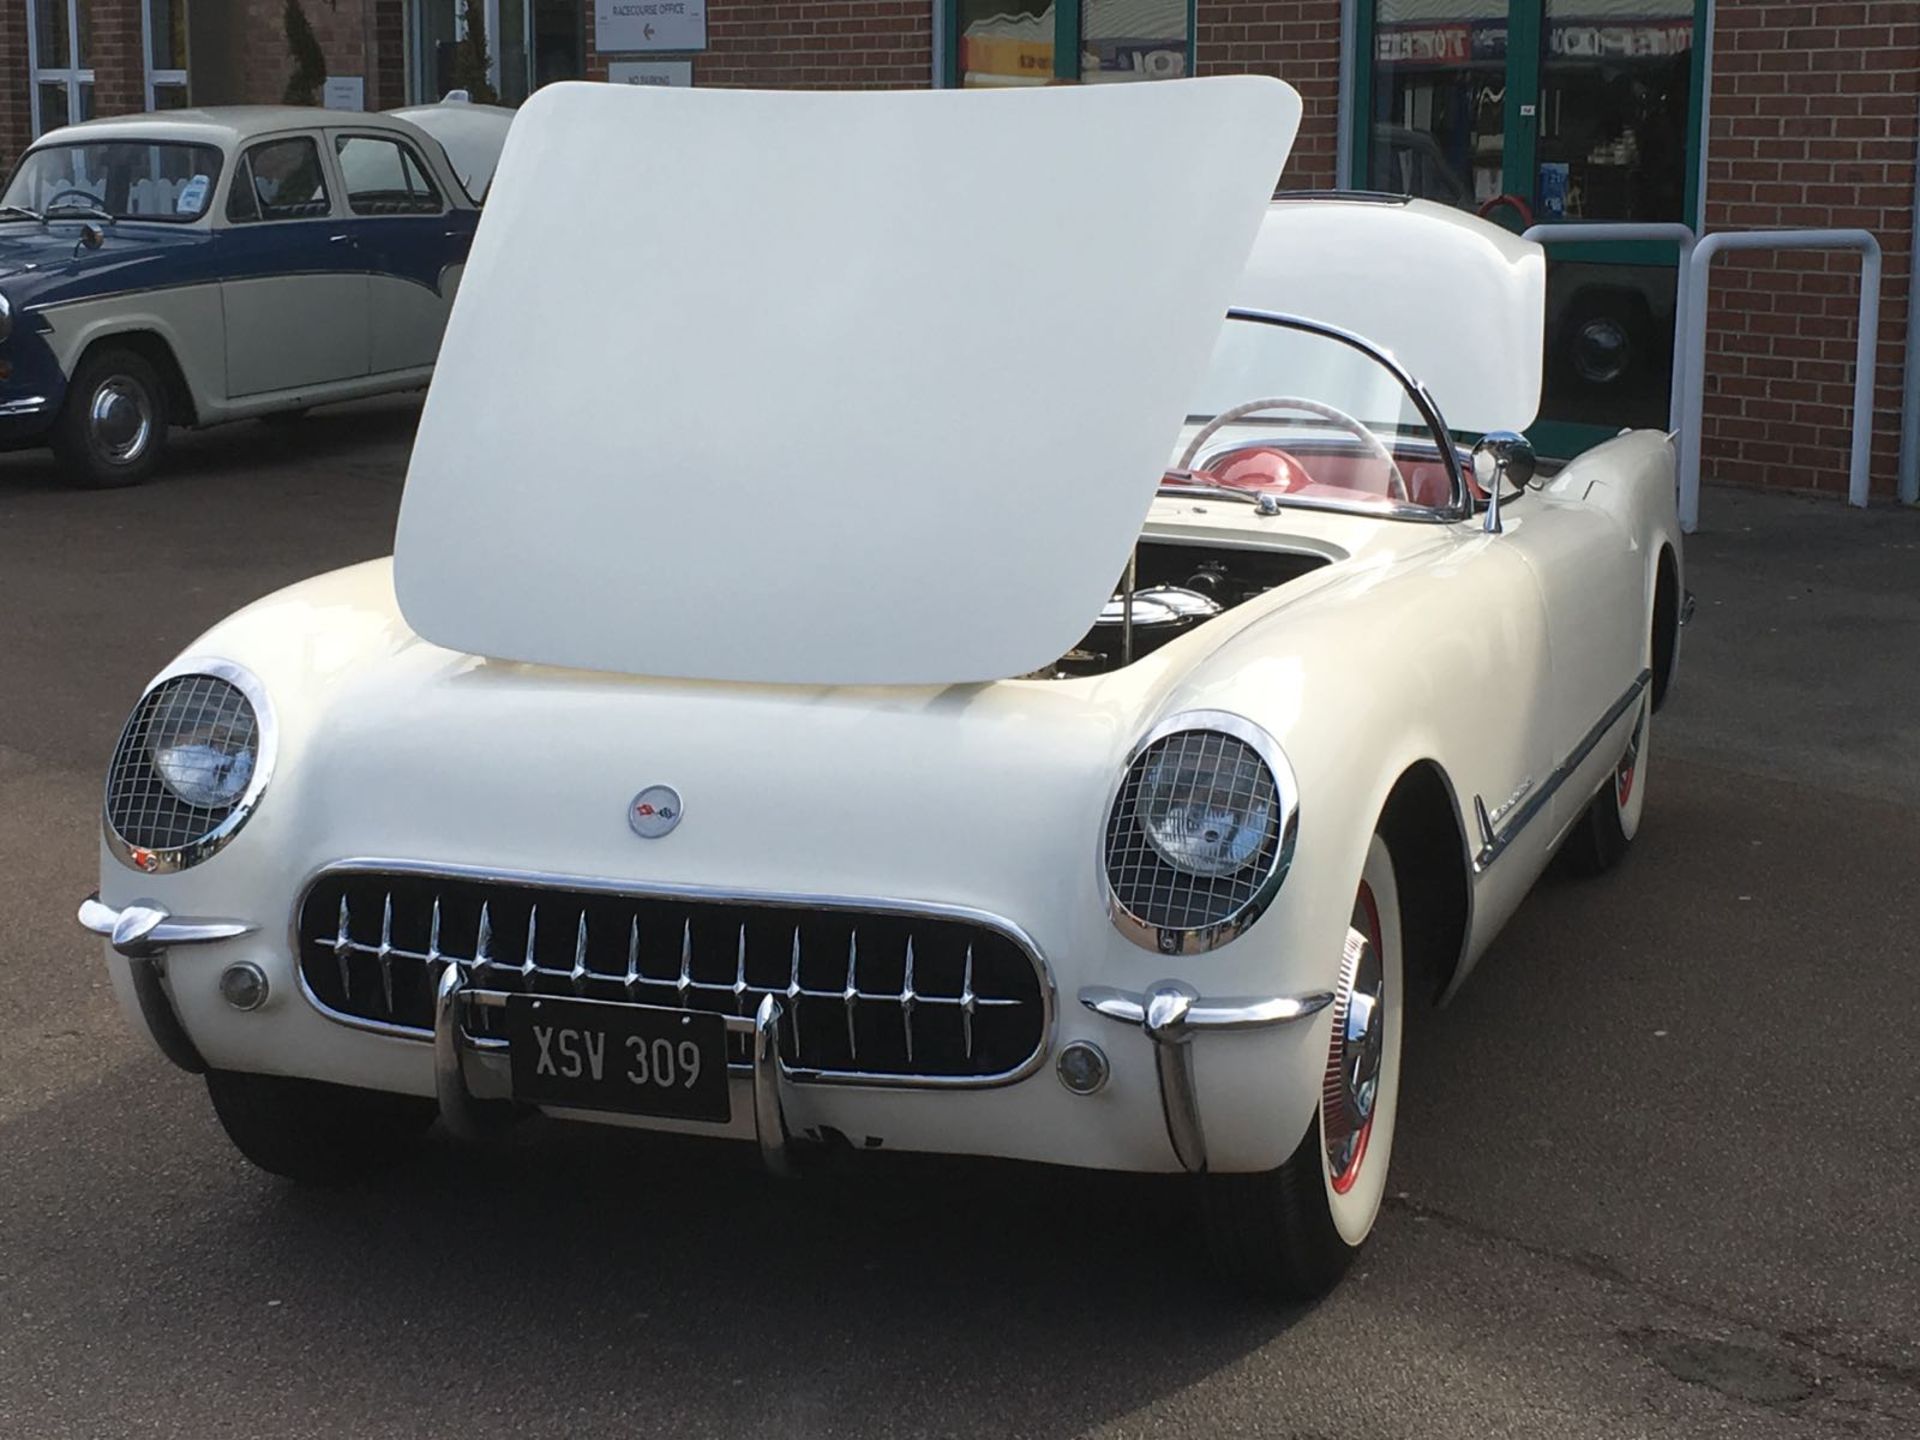 1954 Corvette In The UK ***NO RESERVE*** - Featured at the LCCS - Image 20 of 22